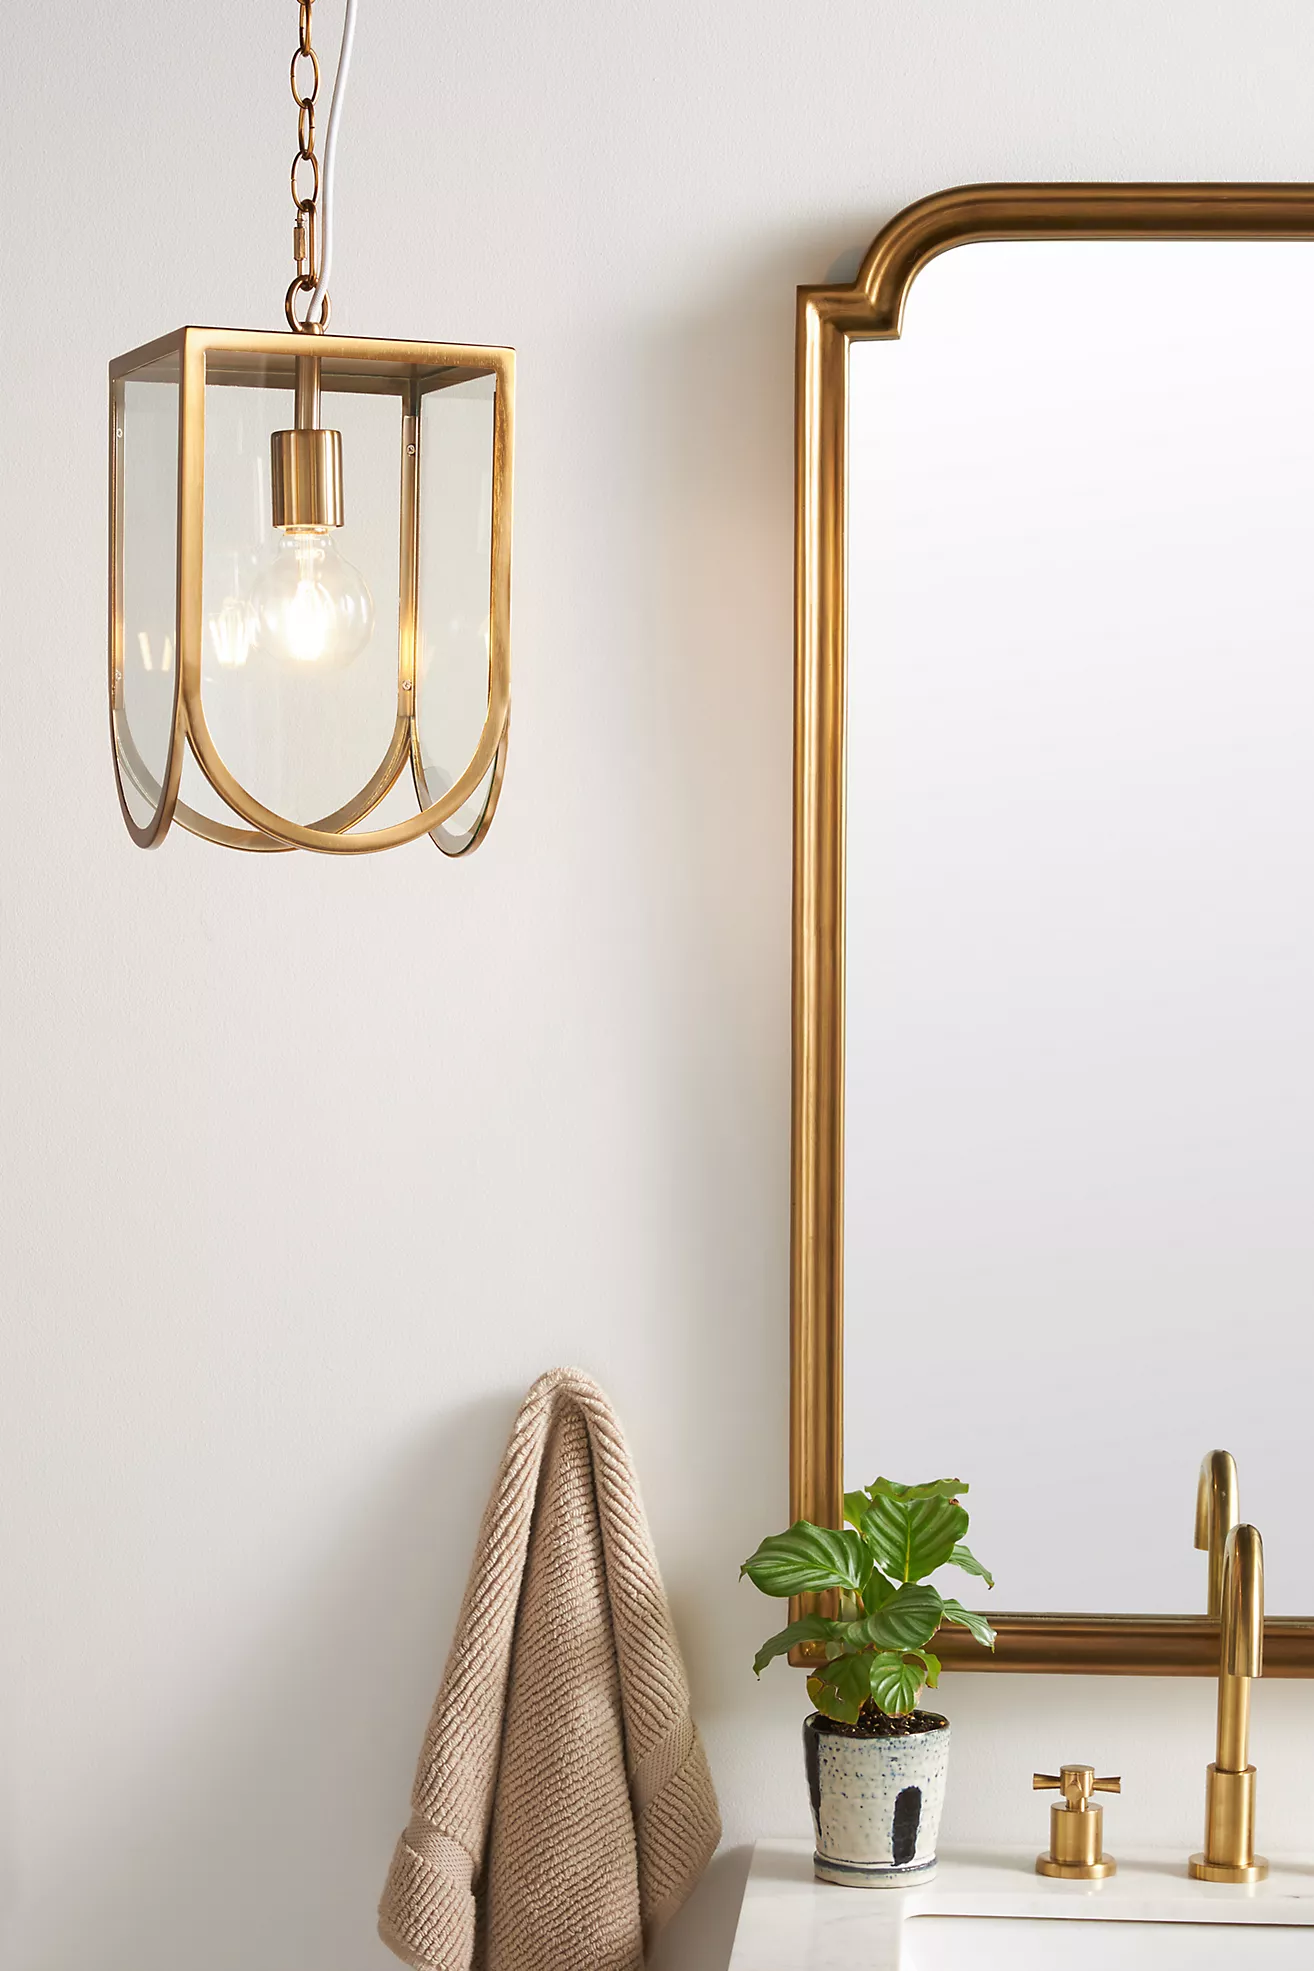 Swap Out Sconces for Small Pendants